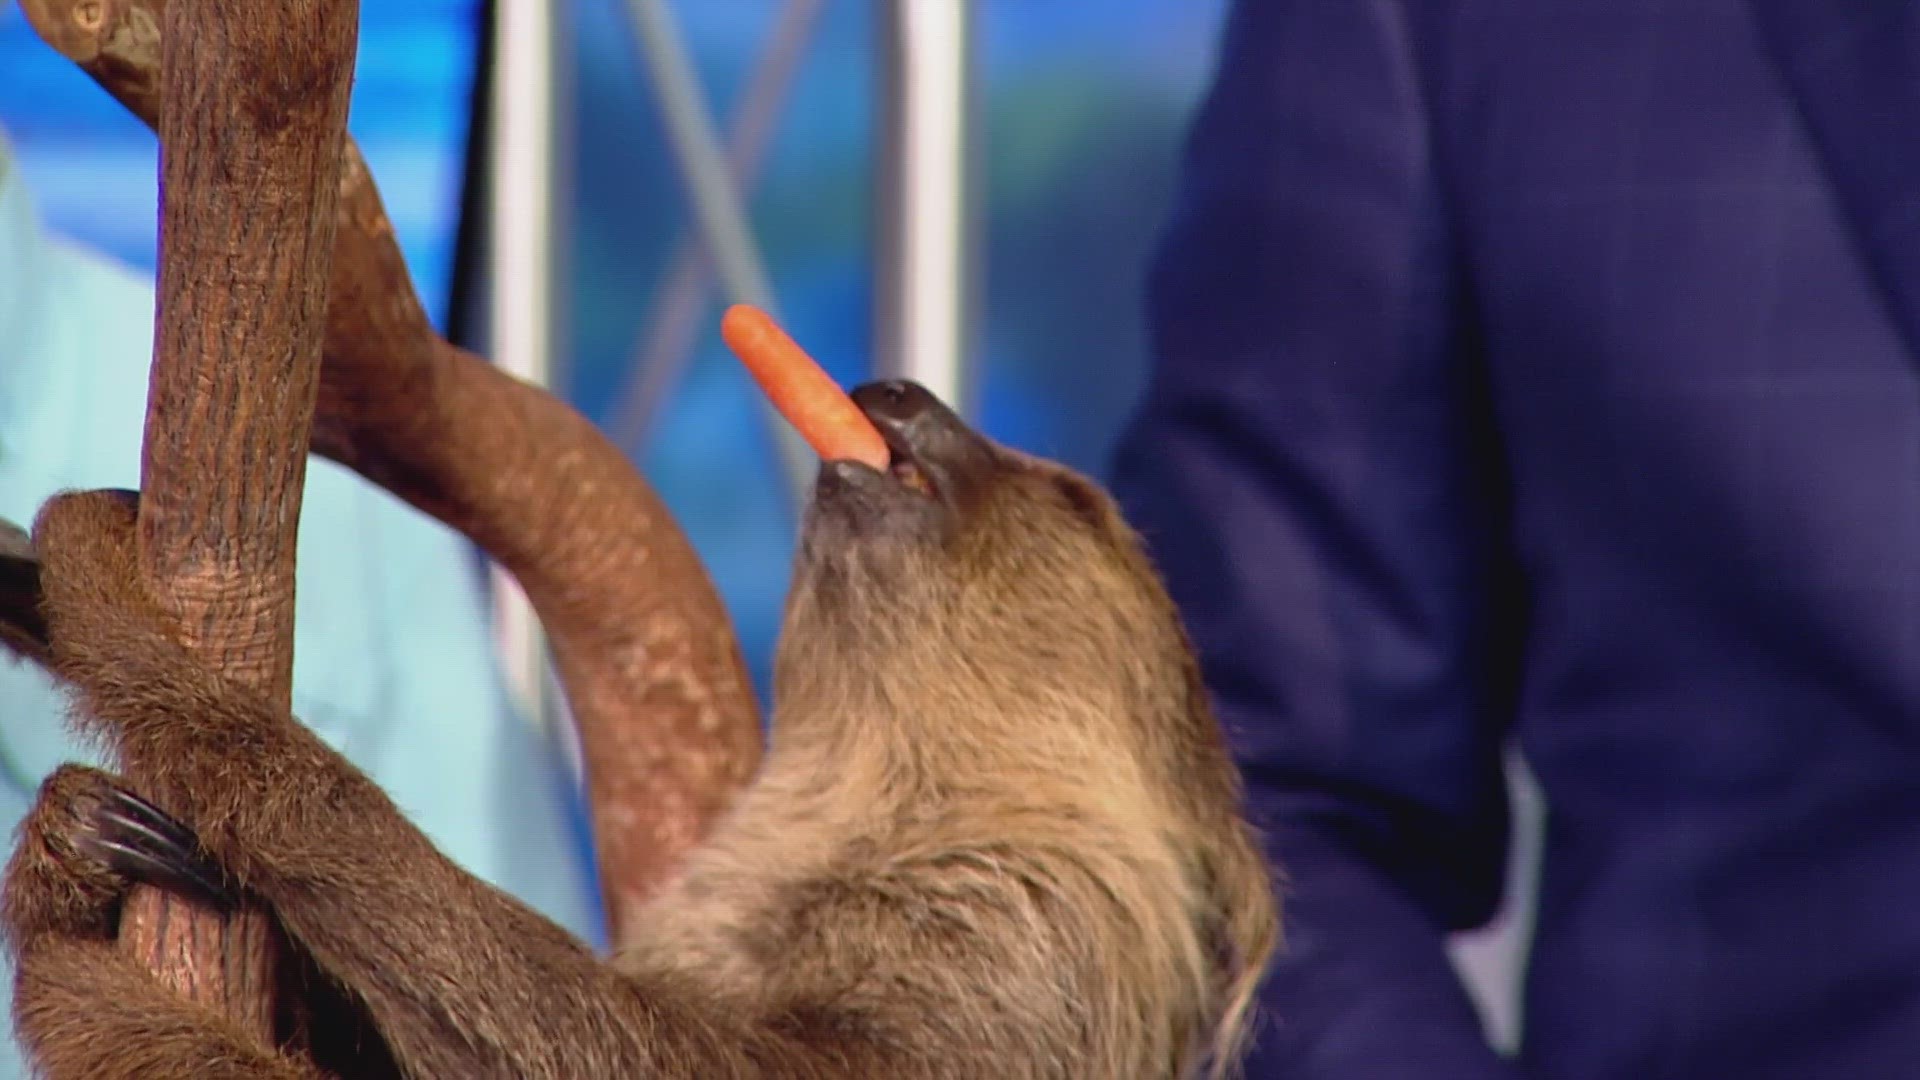 GMJ got a lot cuter and fuzzier Saturday morning as animals from Cool Zoo joined the show.